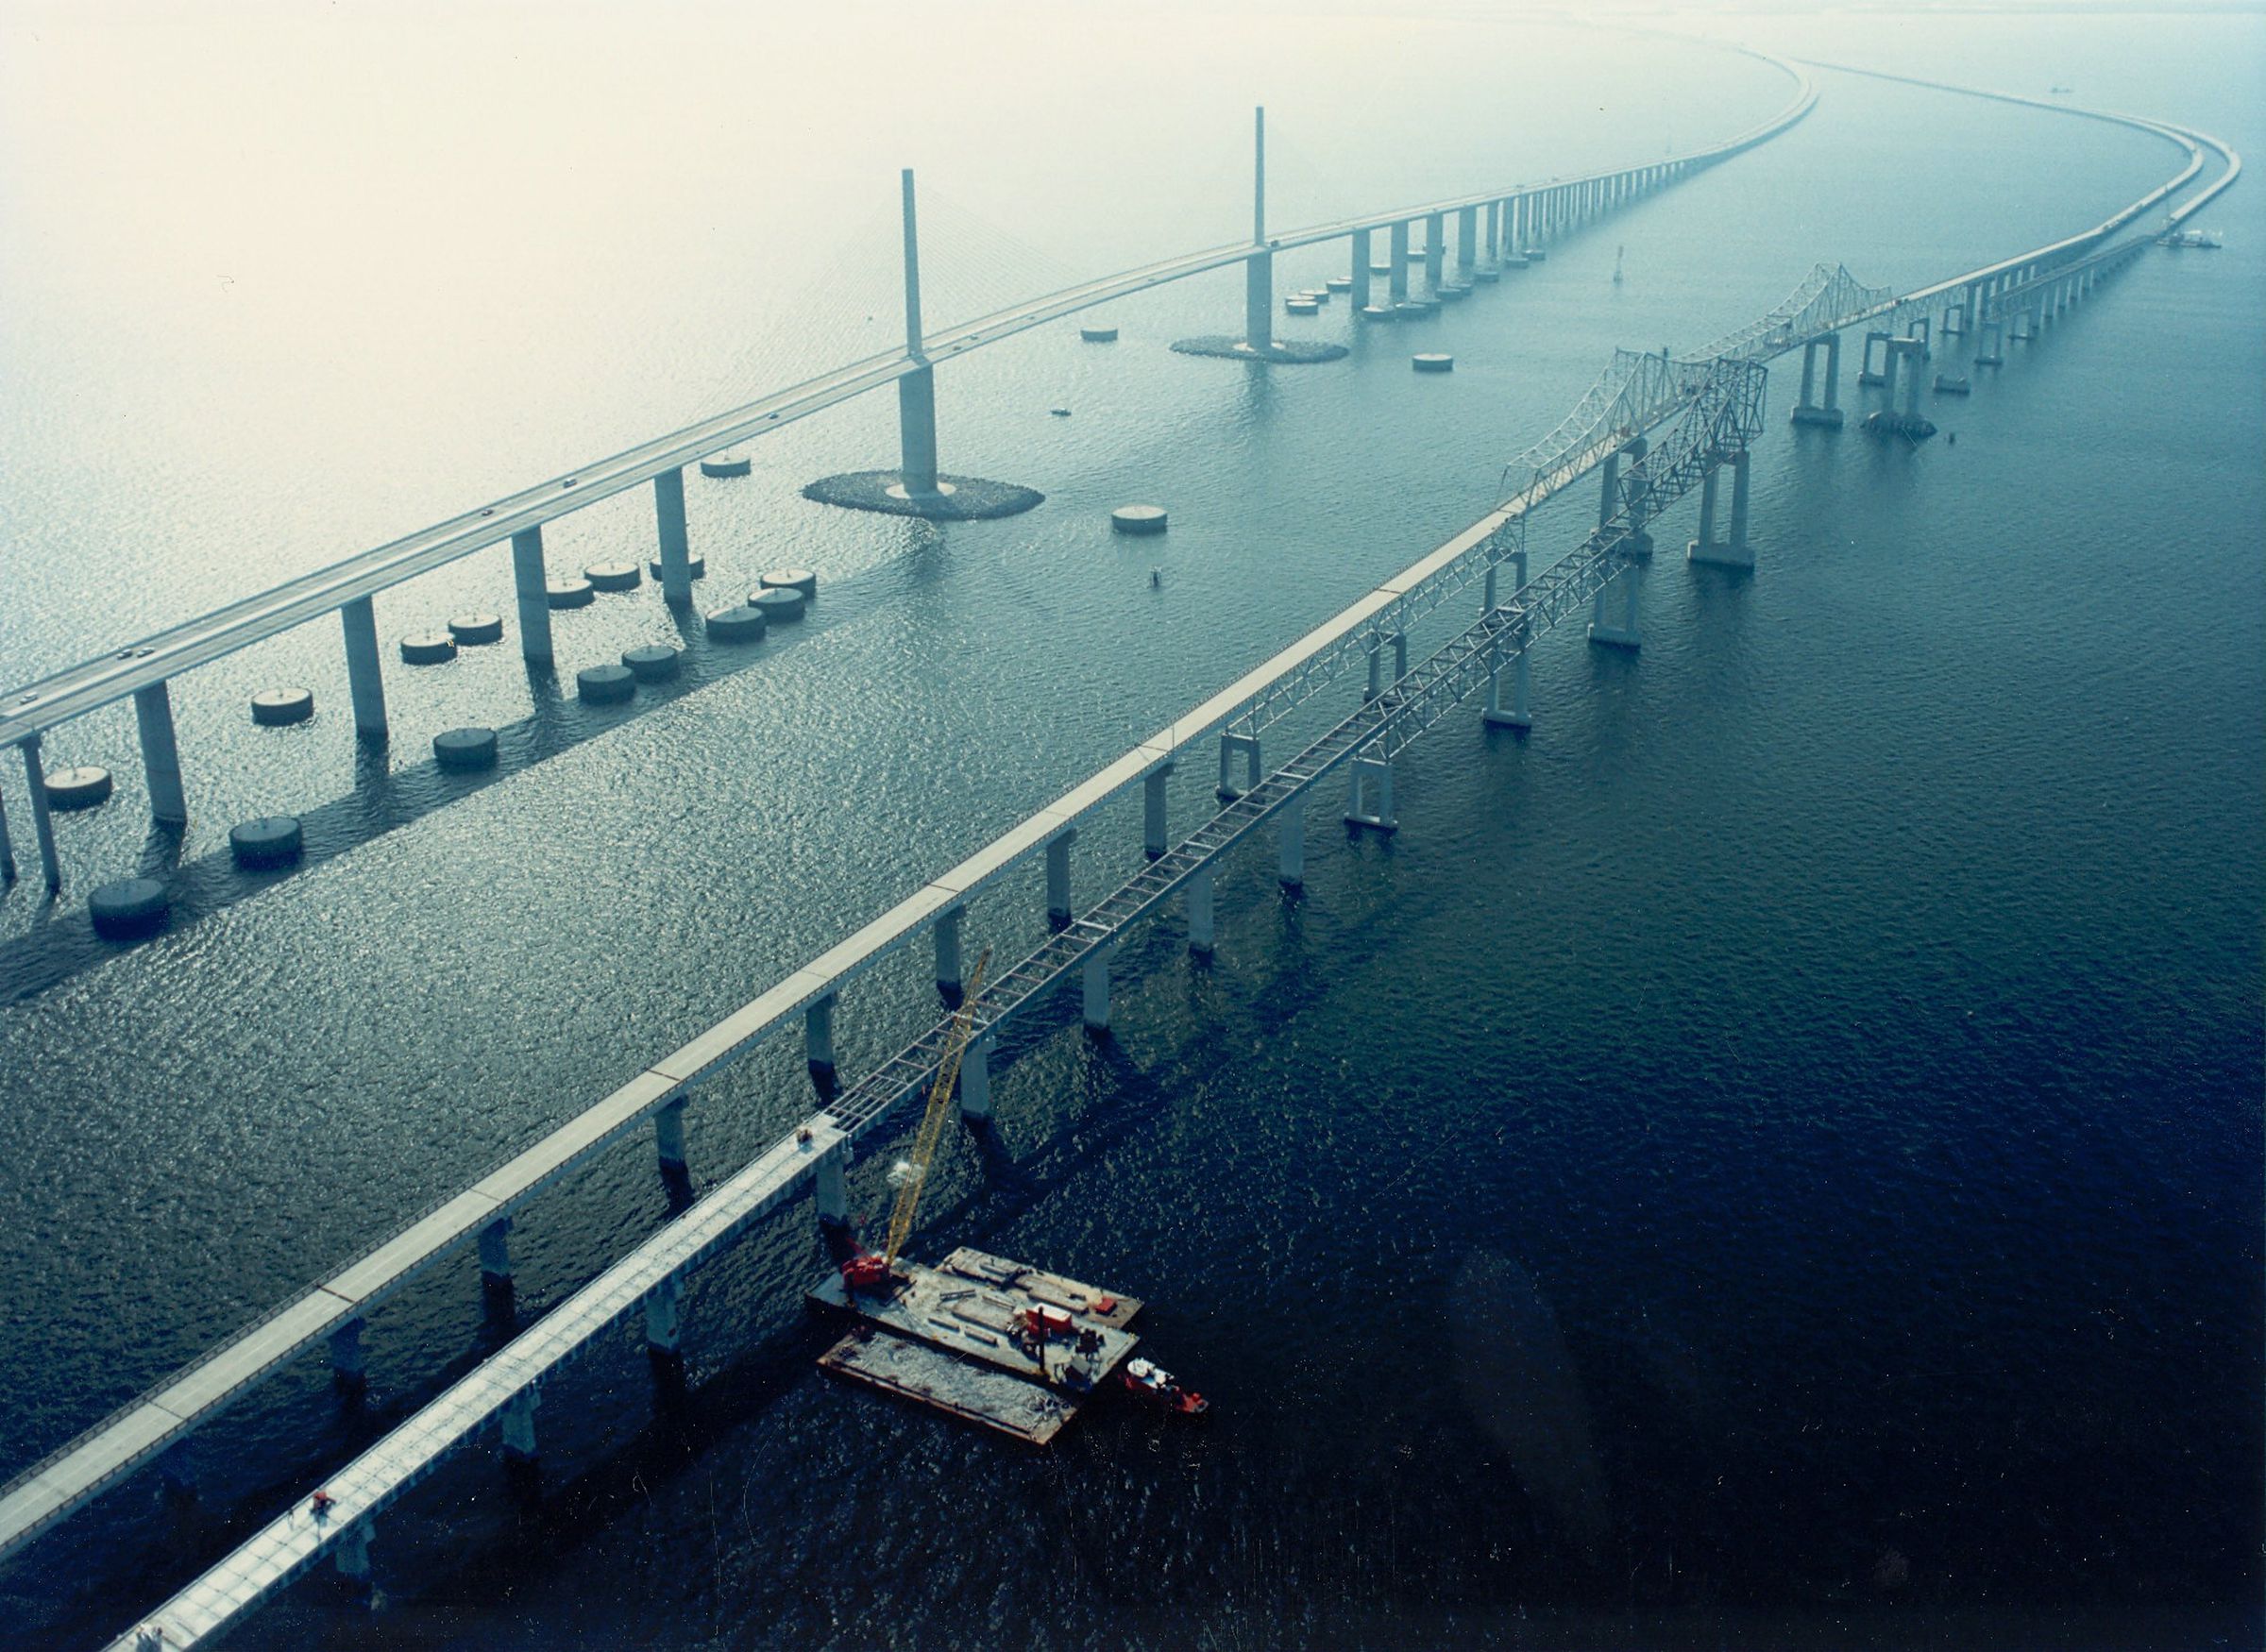 The old Sunshine Skyway Bridge (right) next to the new one (left), with concrete dolphins surrounding its piers.